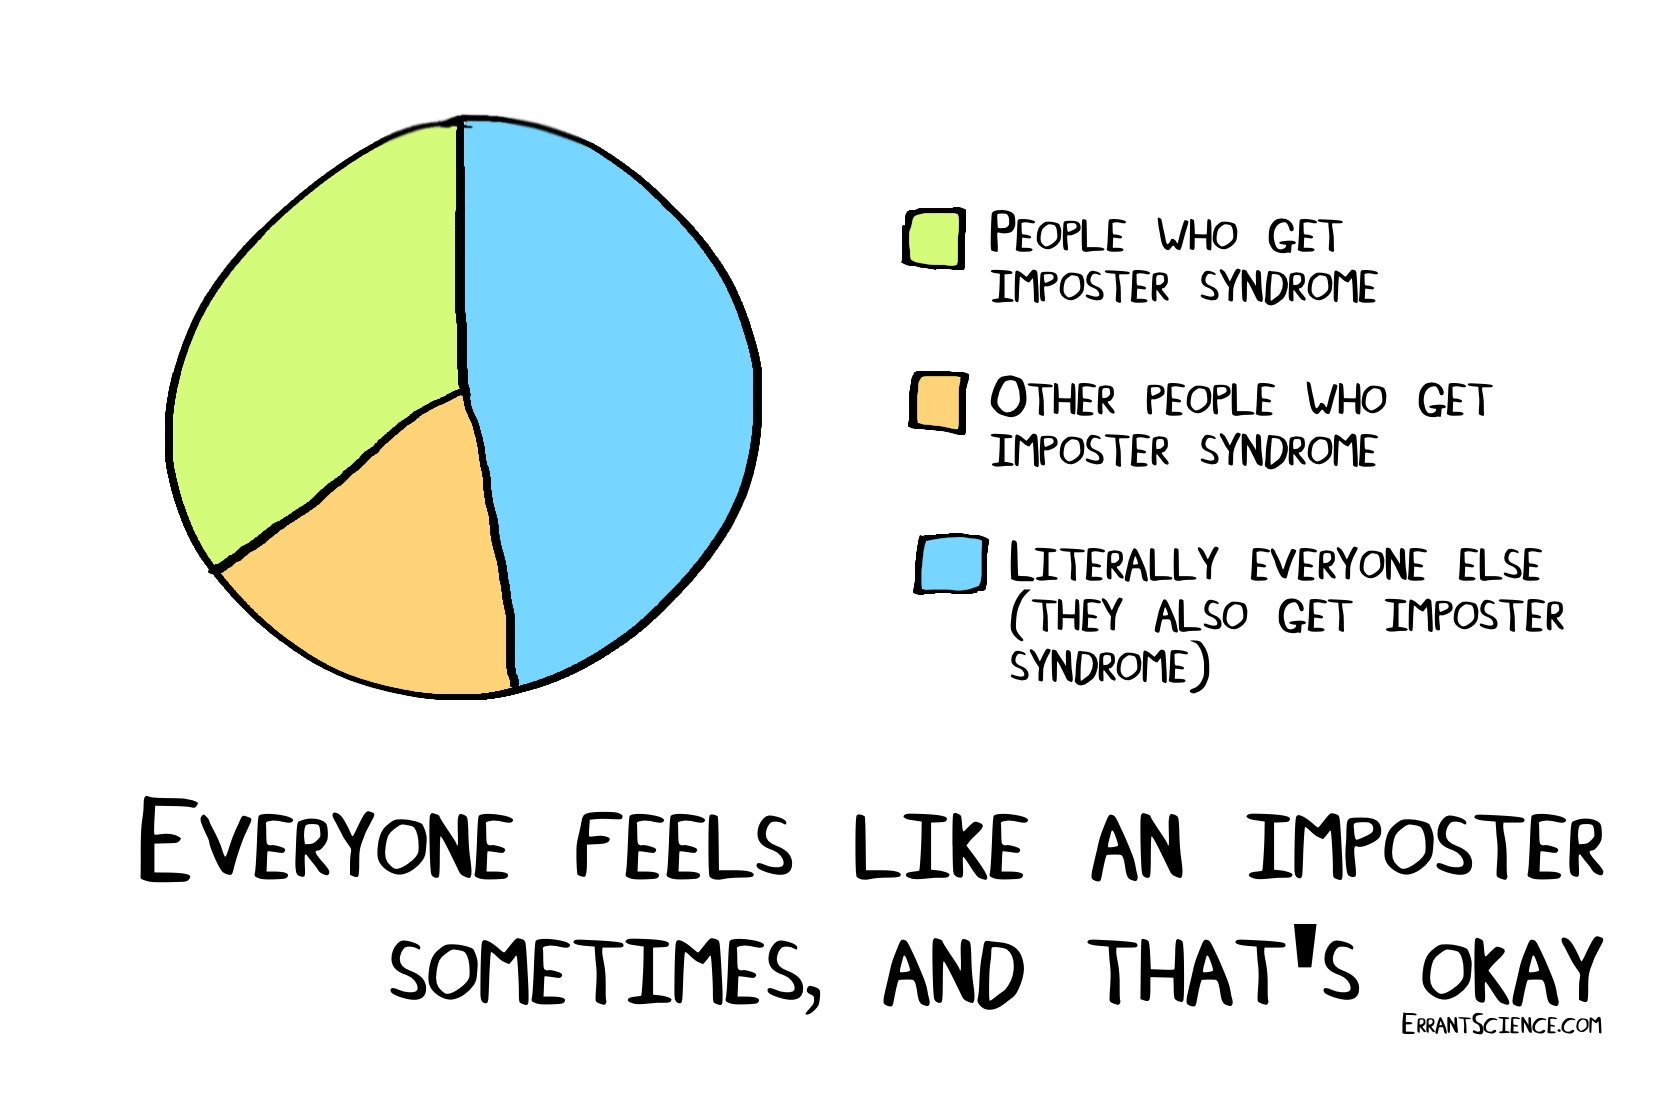 Impostor syndrome pie chart